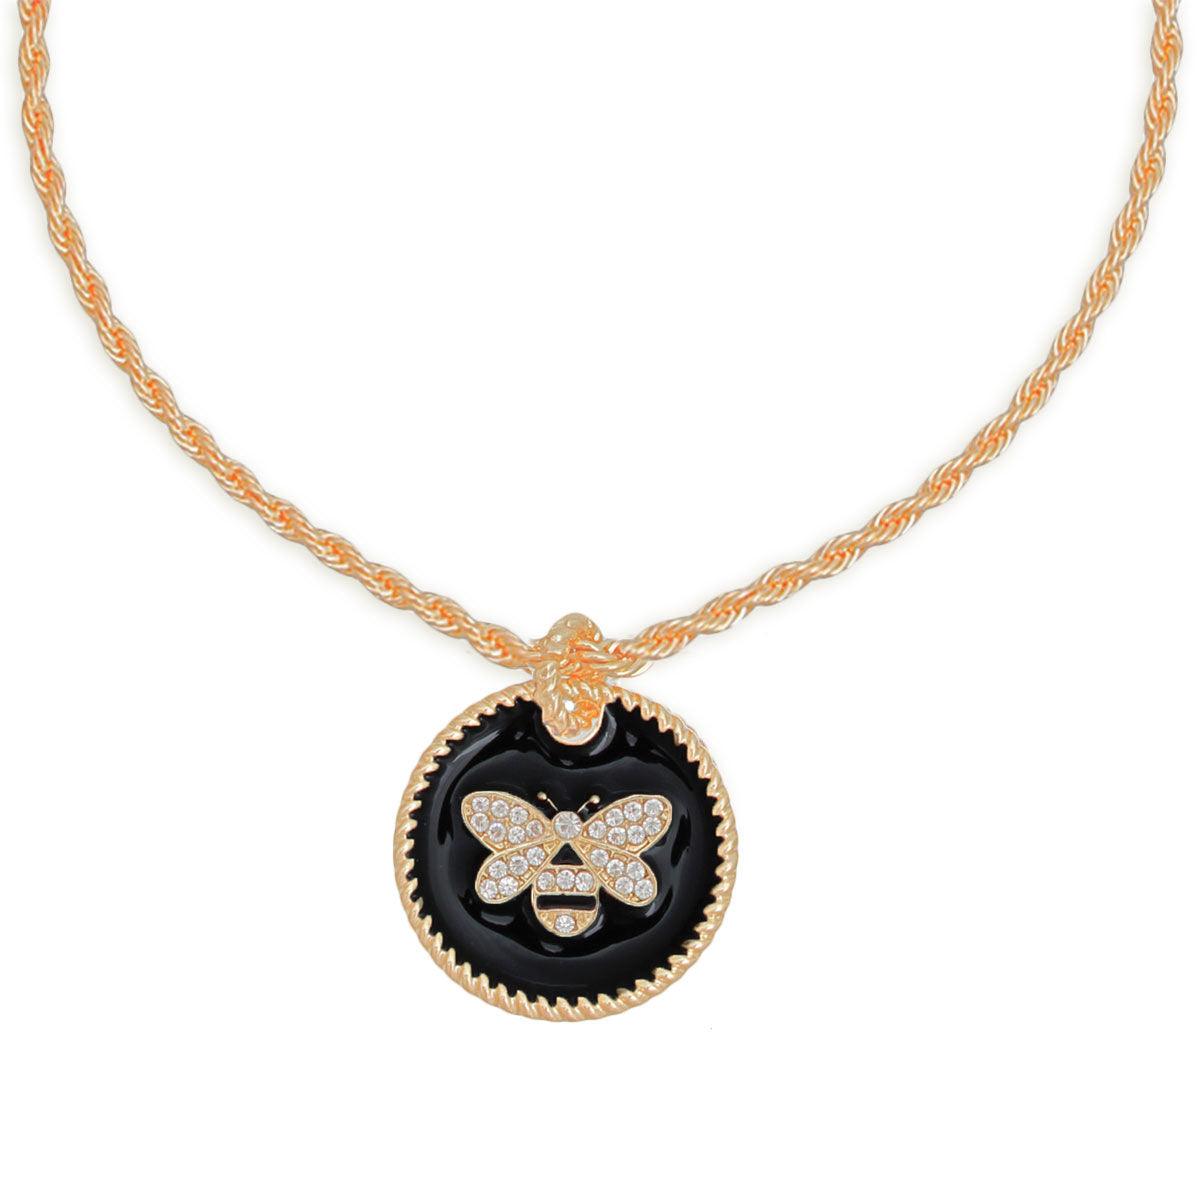 Stunning Black Gold Bee Necklace - Shop Fashion Jewelry Now